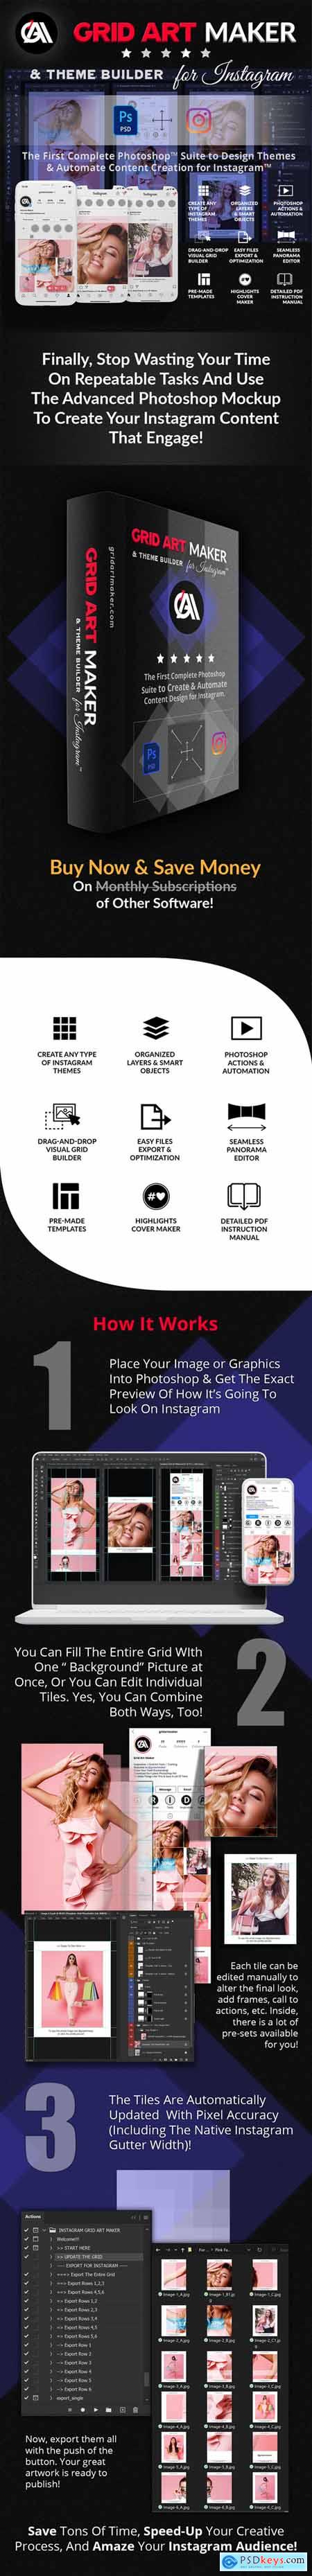 Instagram Grid Art Maker - All-In-One Photoshop Suite 30243603